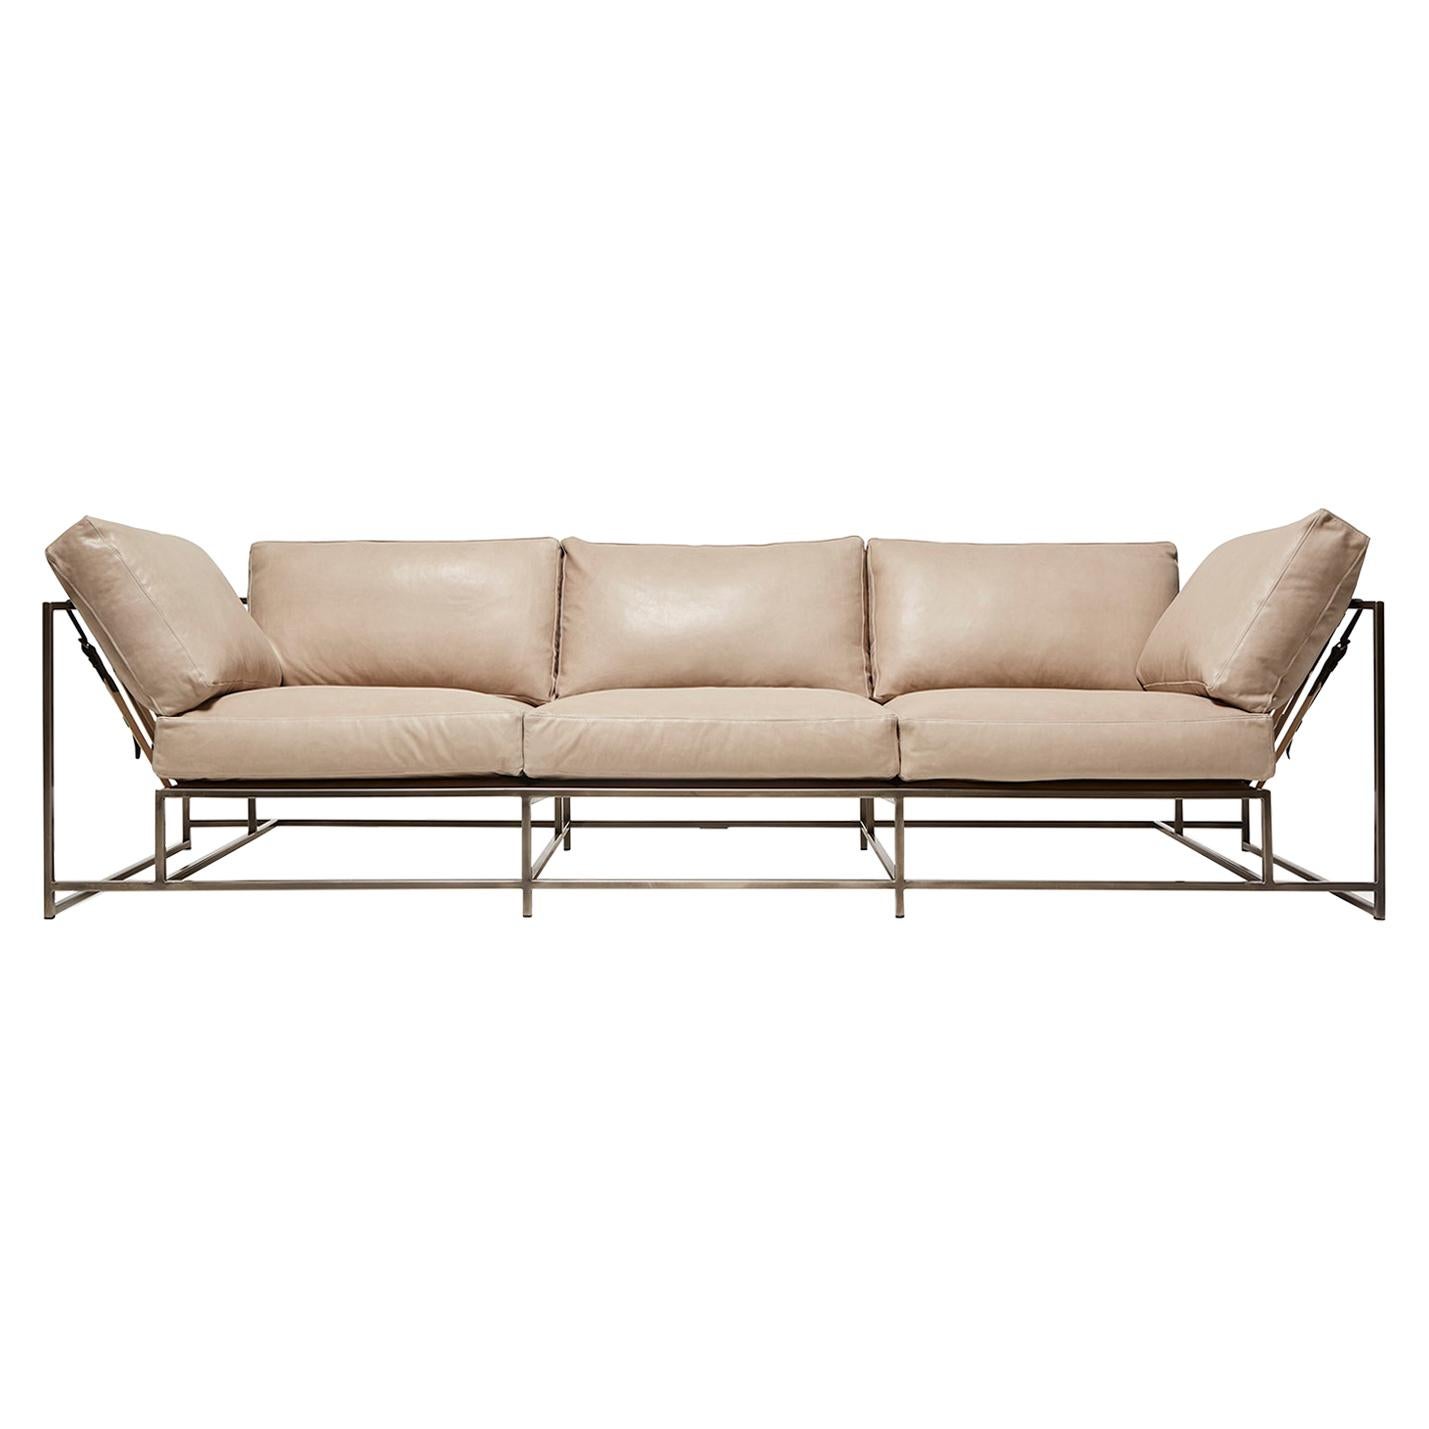 Cream Leather and Antique Nickel Sofa For Sale